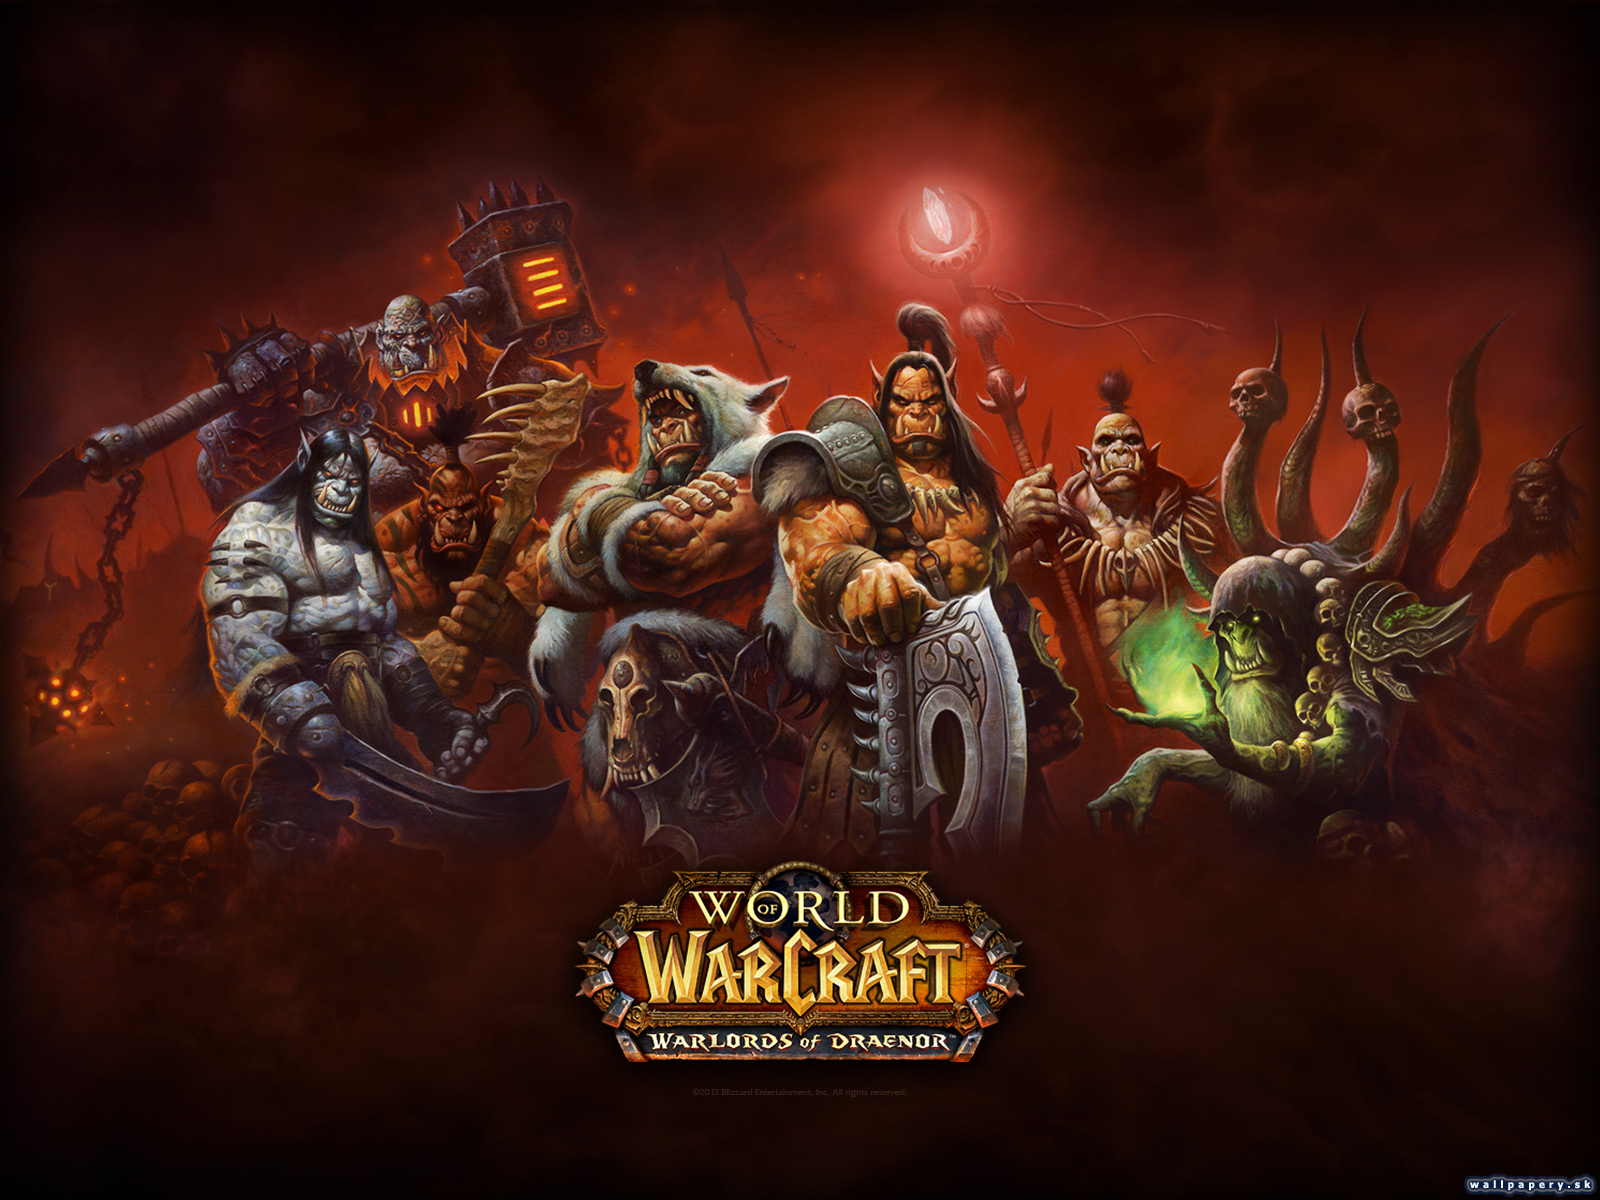 World of Warcraft: Warlords of Draenor - wallpaper 1